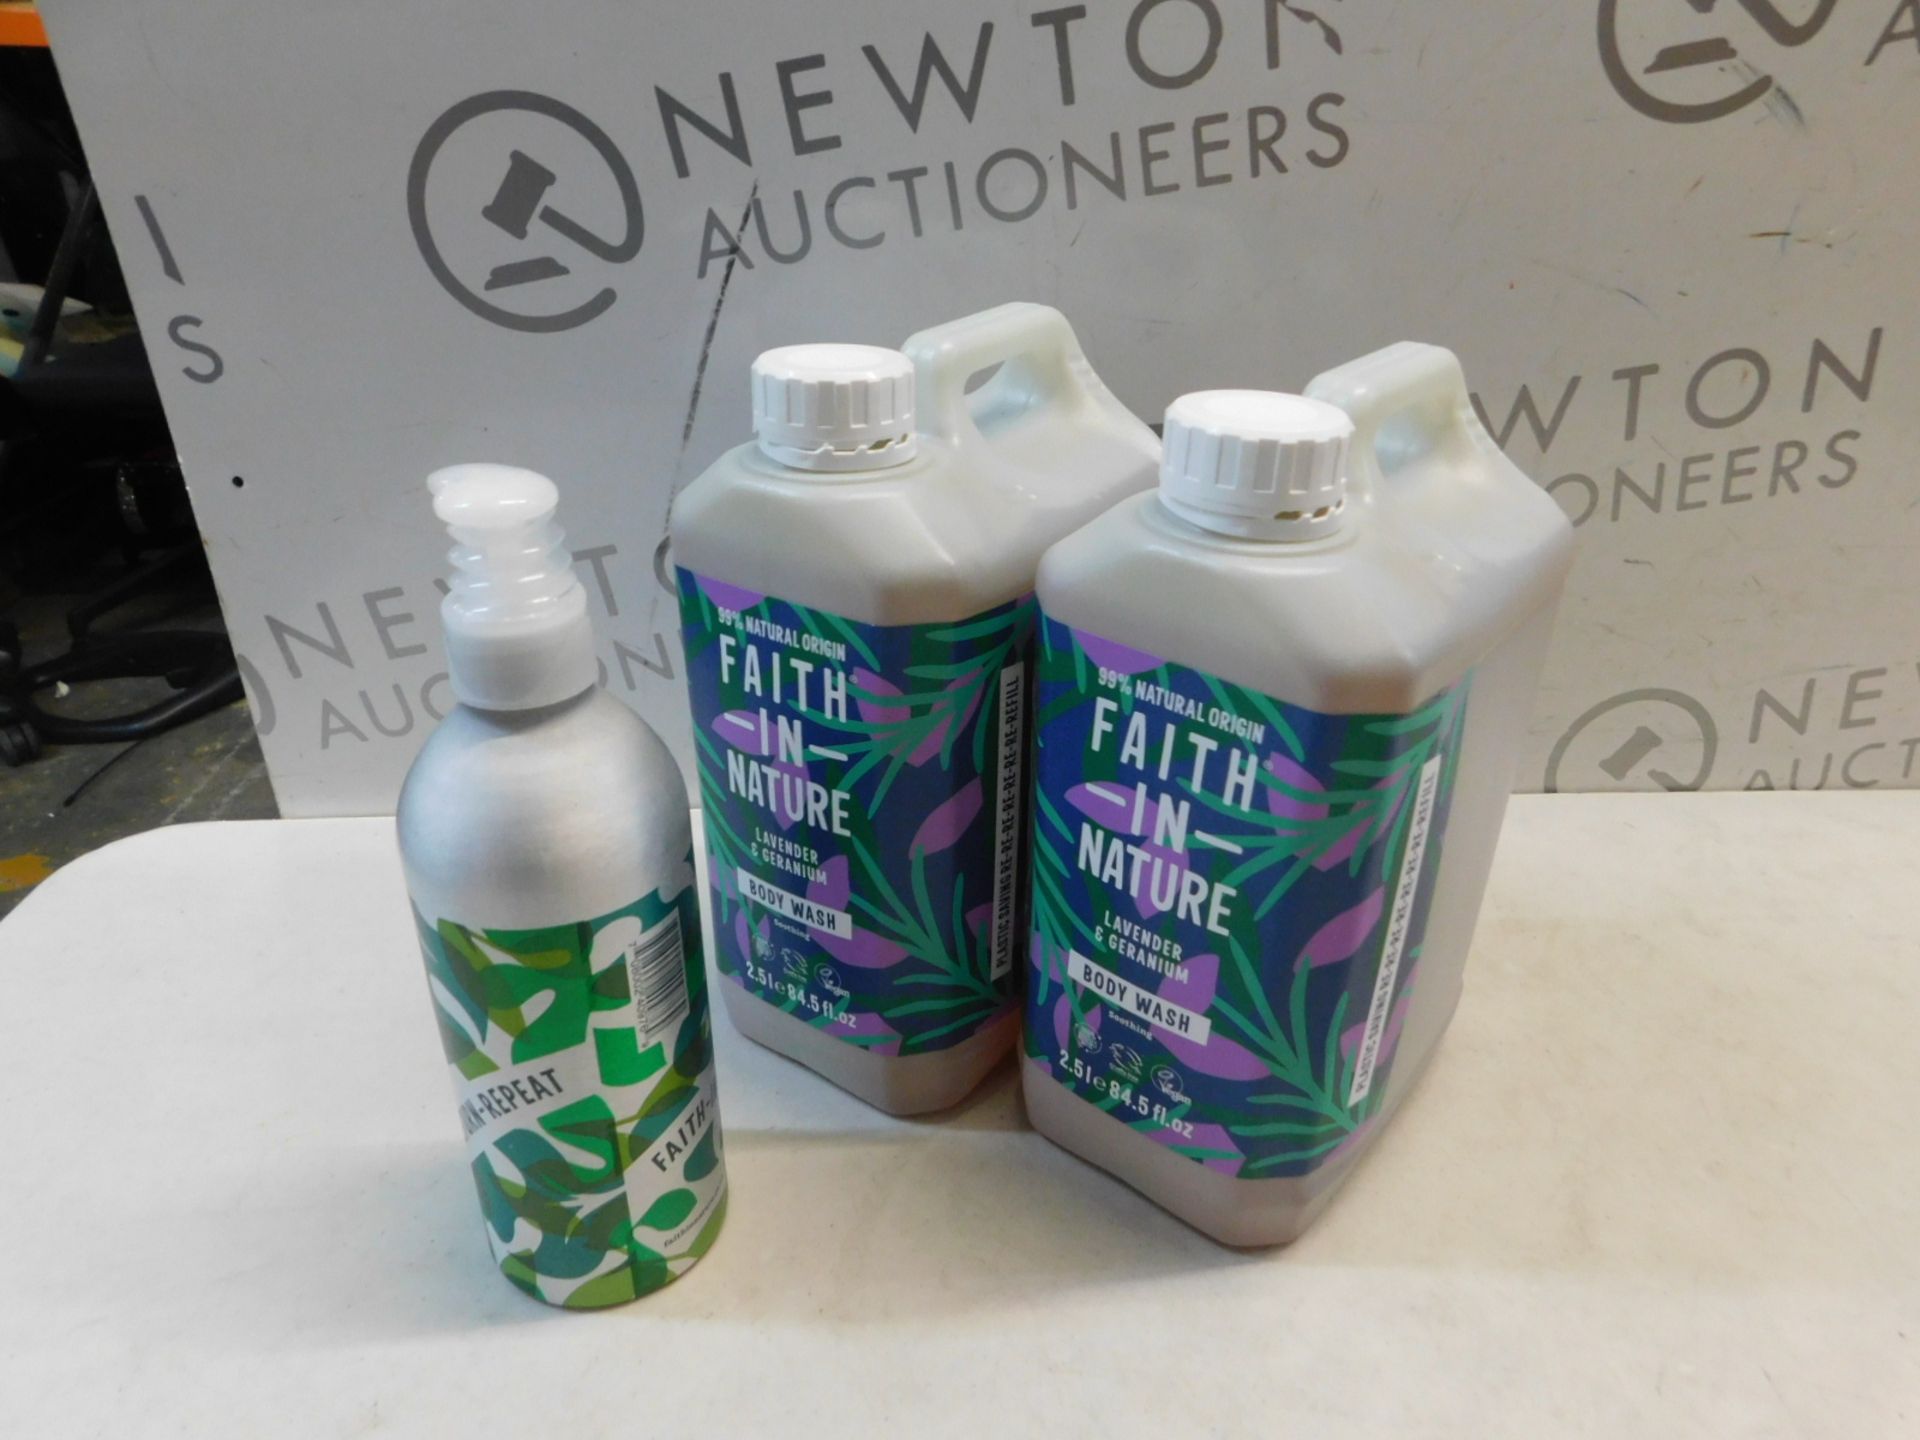 2 TUBS OF FAITH IN NATURE BODY WASH RRP Â£29.99